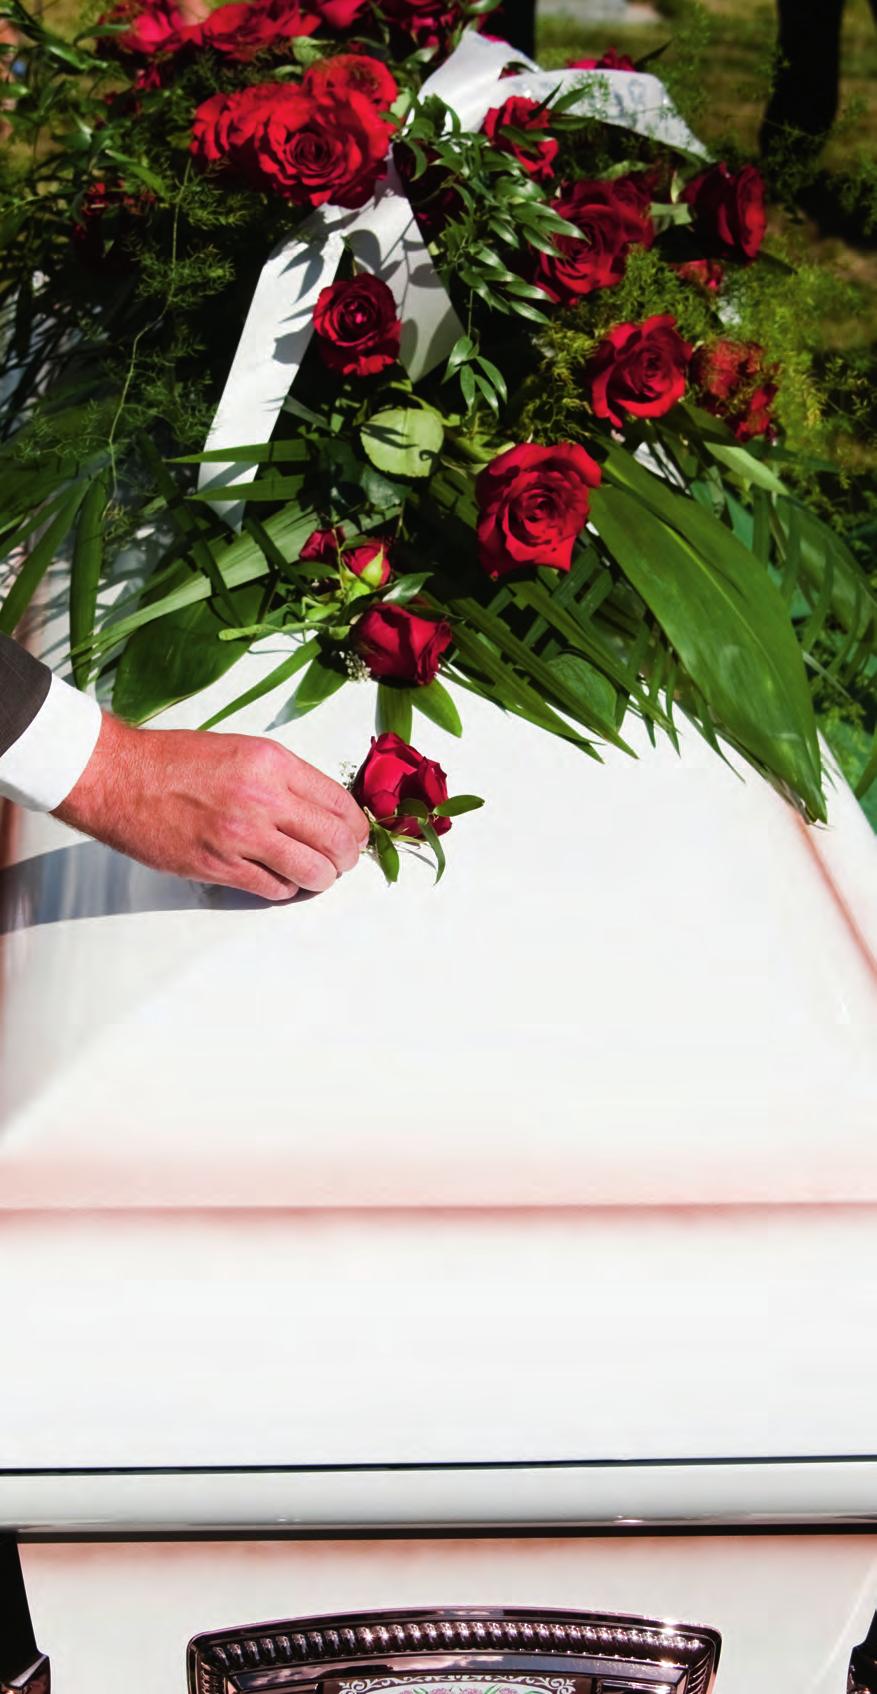 MAKING THINGS SIMPLE FOR YOU IS WHAT WE DO BEST! The Simple Alternative Simplicity Funeral & Cremation Care is the alternative to high priced traditional funeral homes.